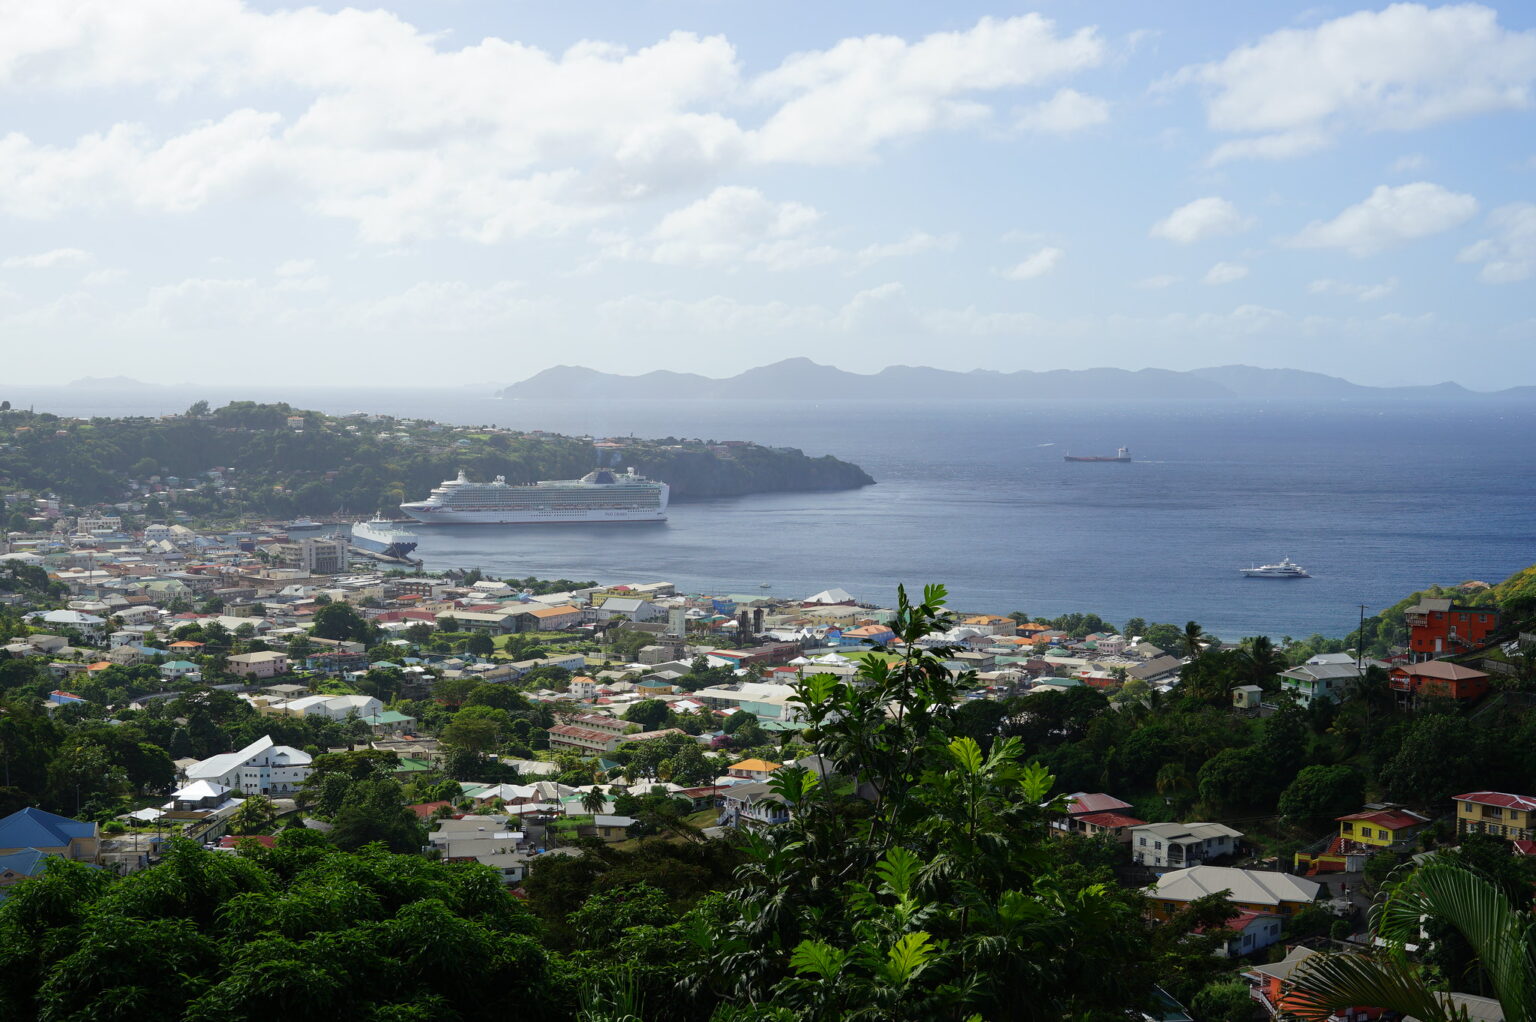 Snorkeling and Diving Sites in St Vincent